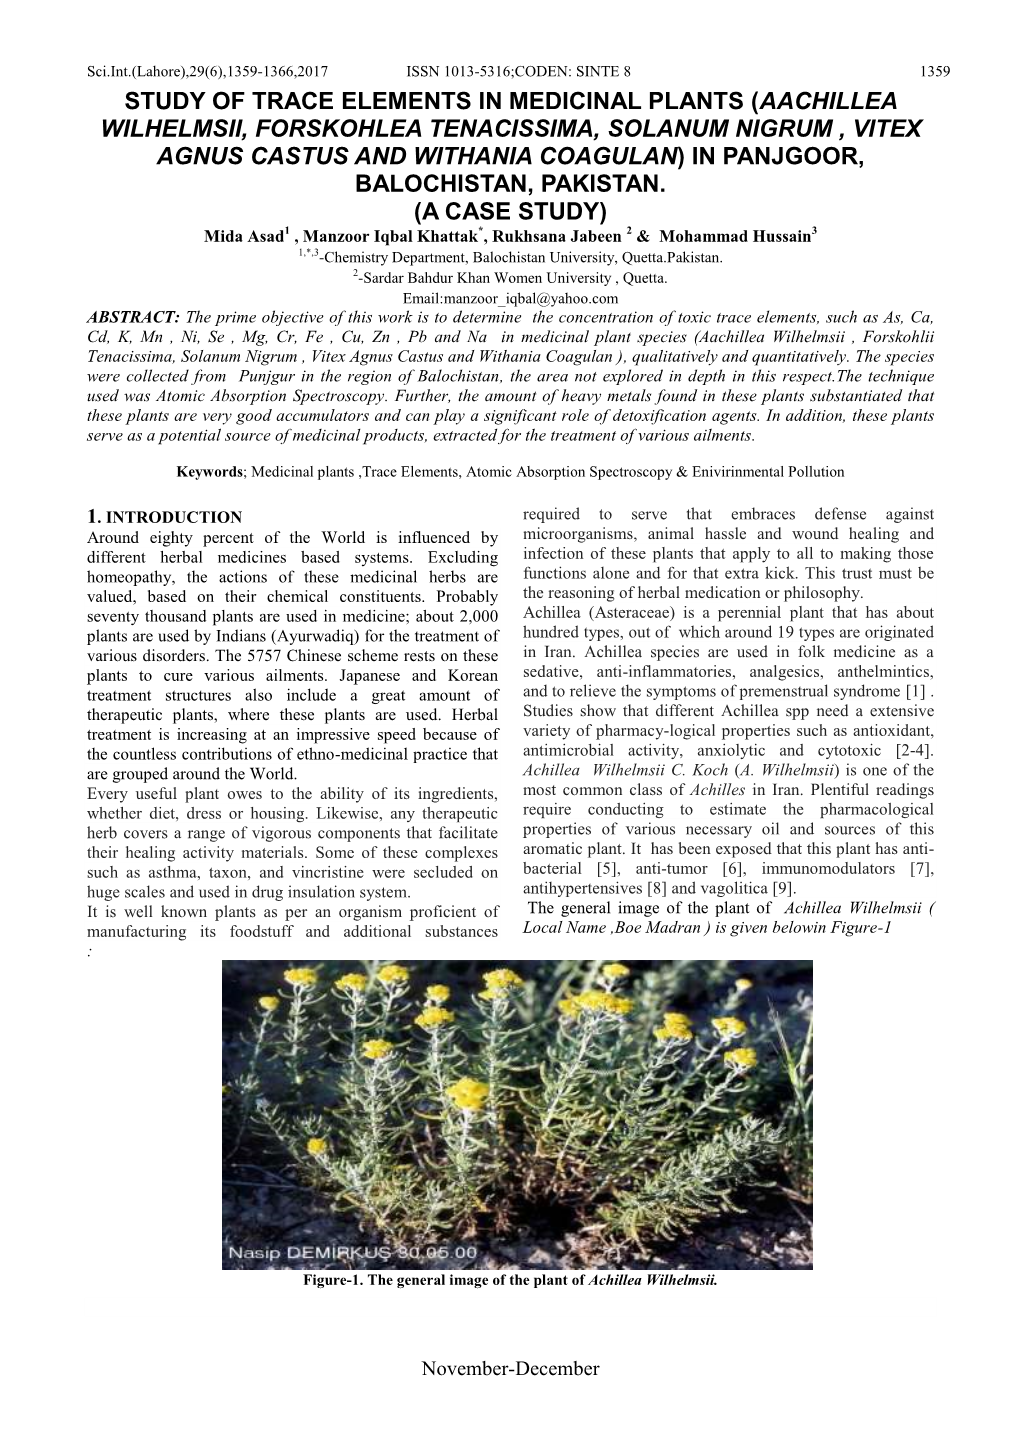 Study of Trace Elements in Medicinal Plants